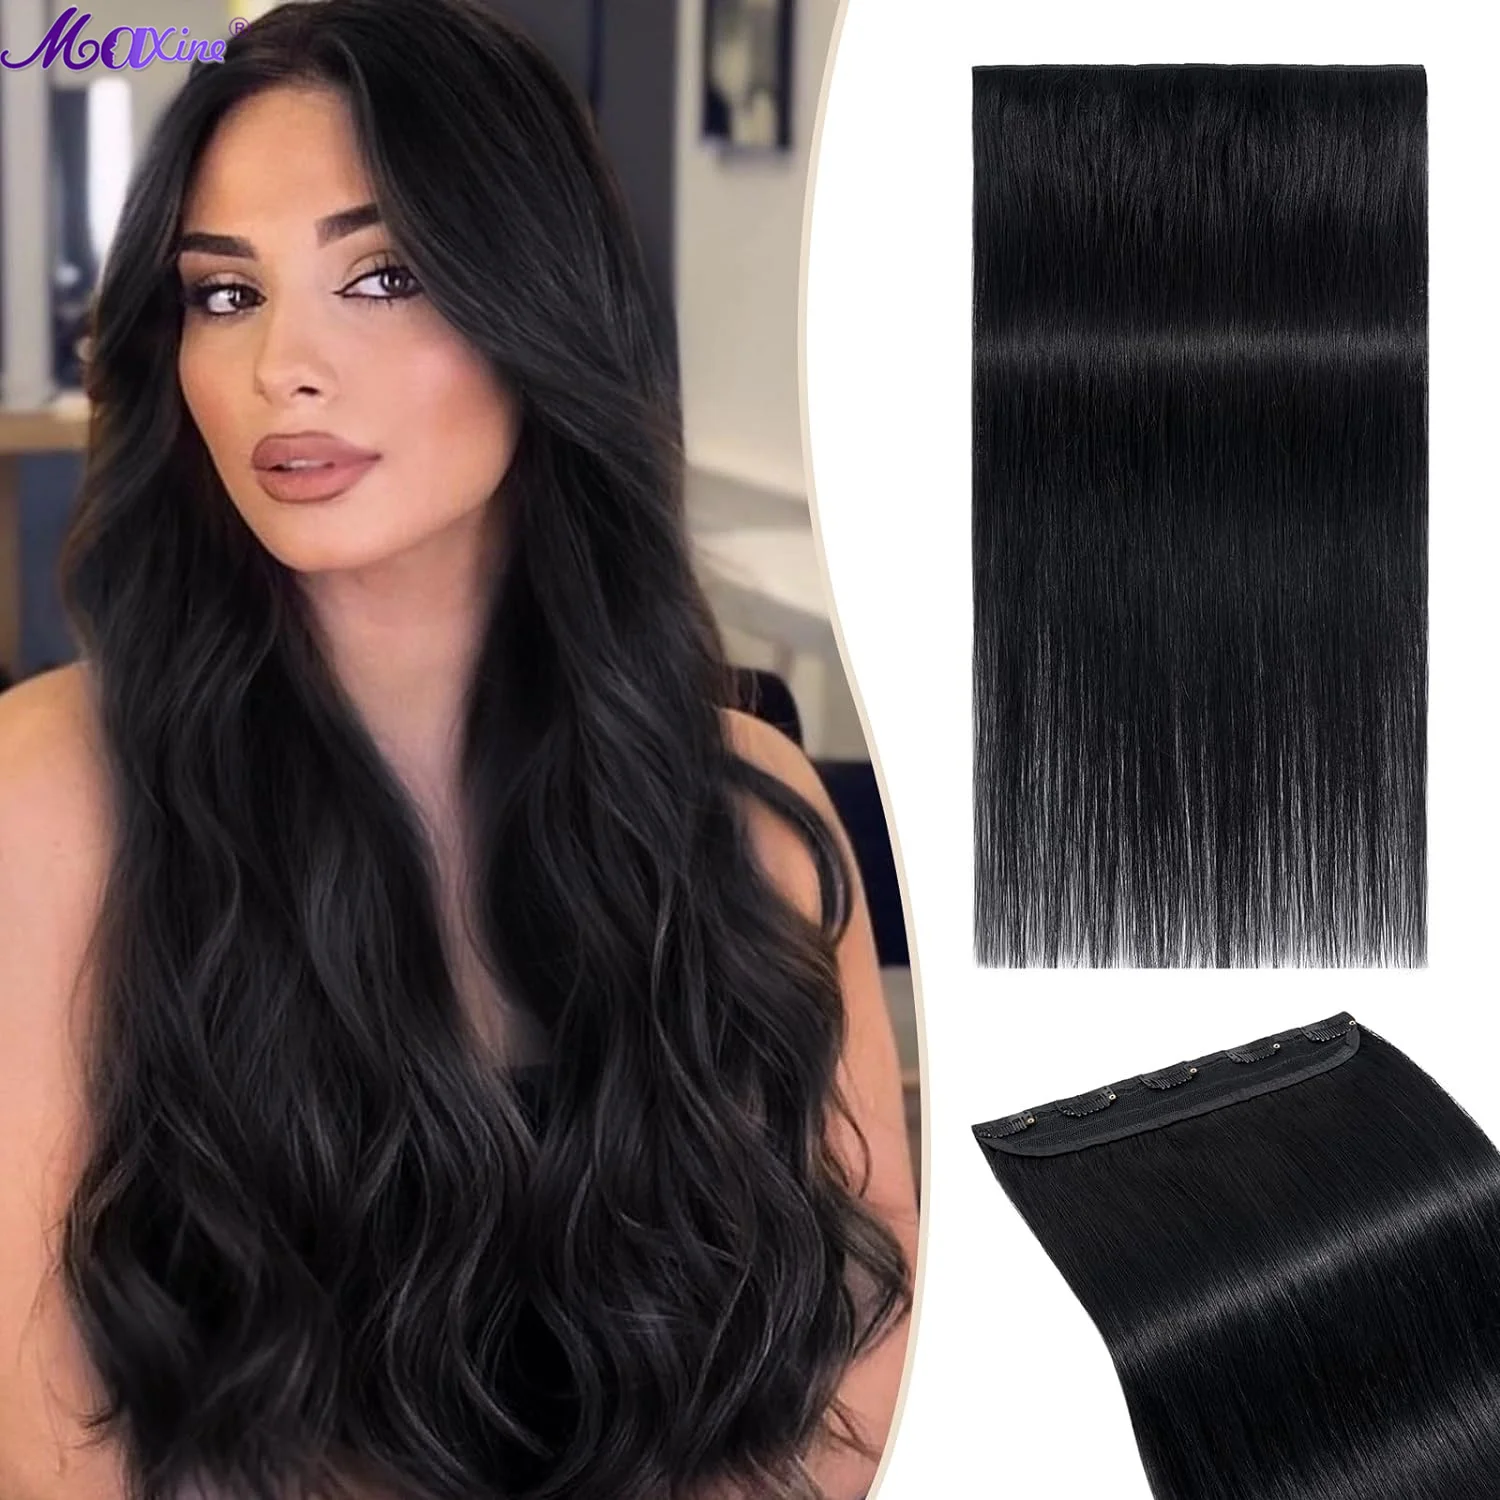 

Jet Black Real Hair Extensions Clip in Human Hair One Piece Five Clips in Human Hair Extensions Straight Clip in Remy Hair